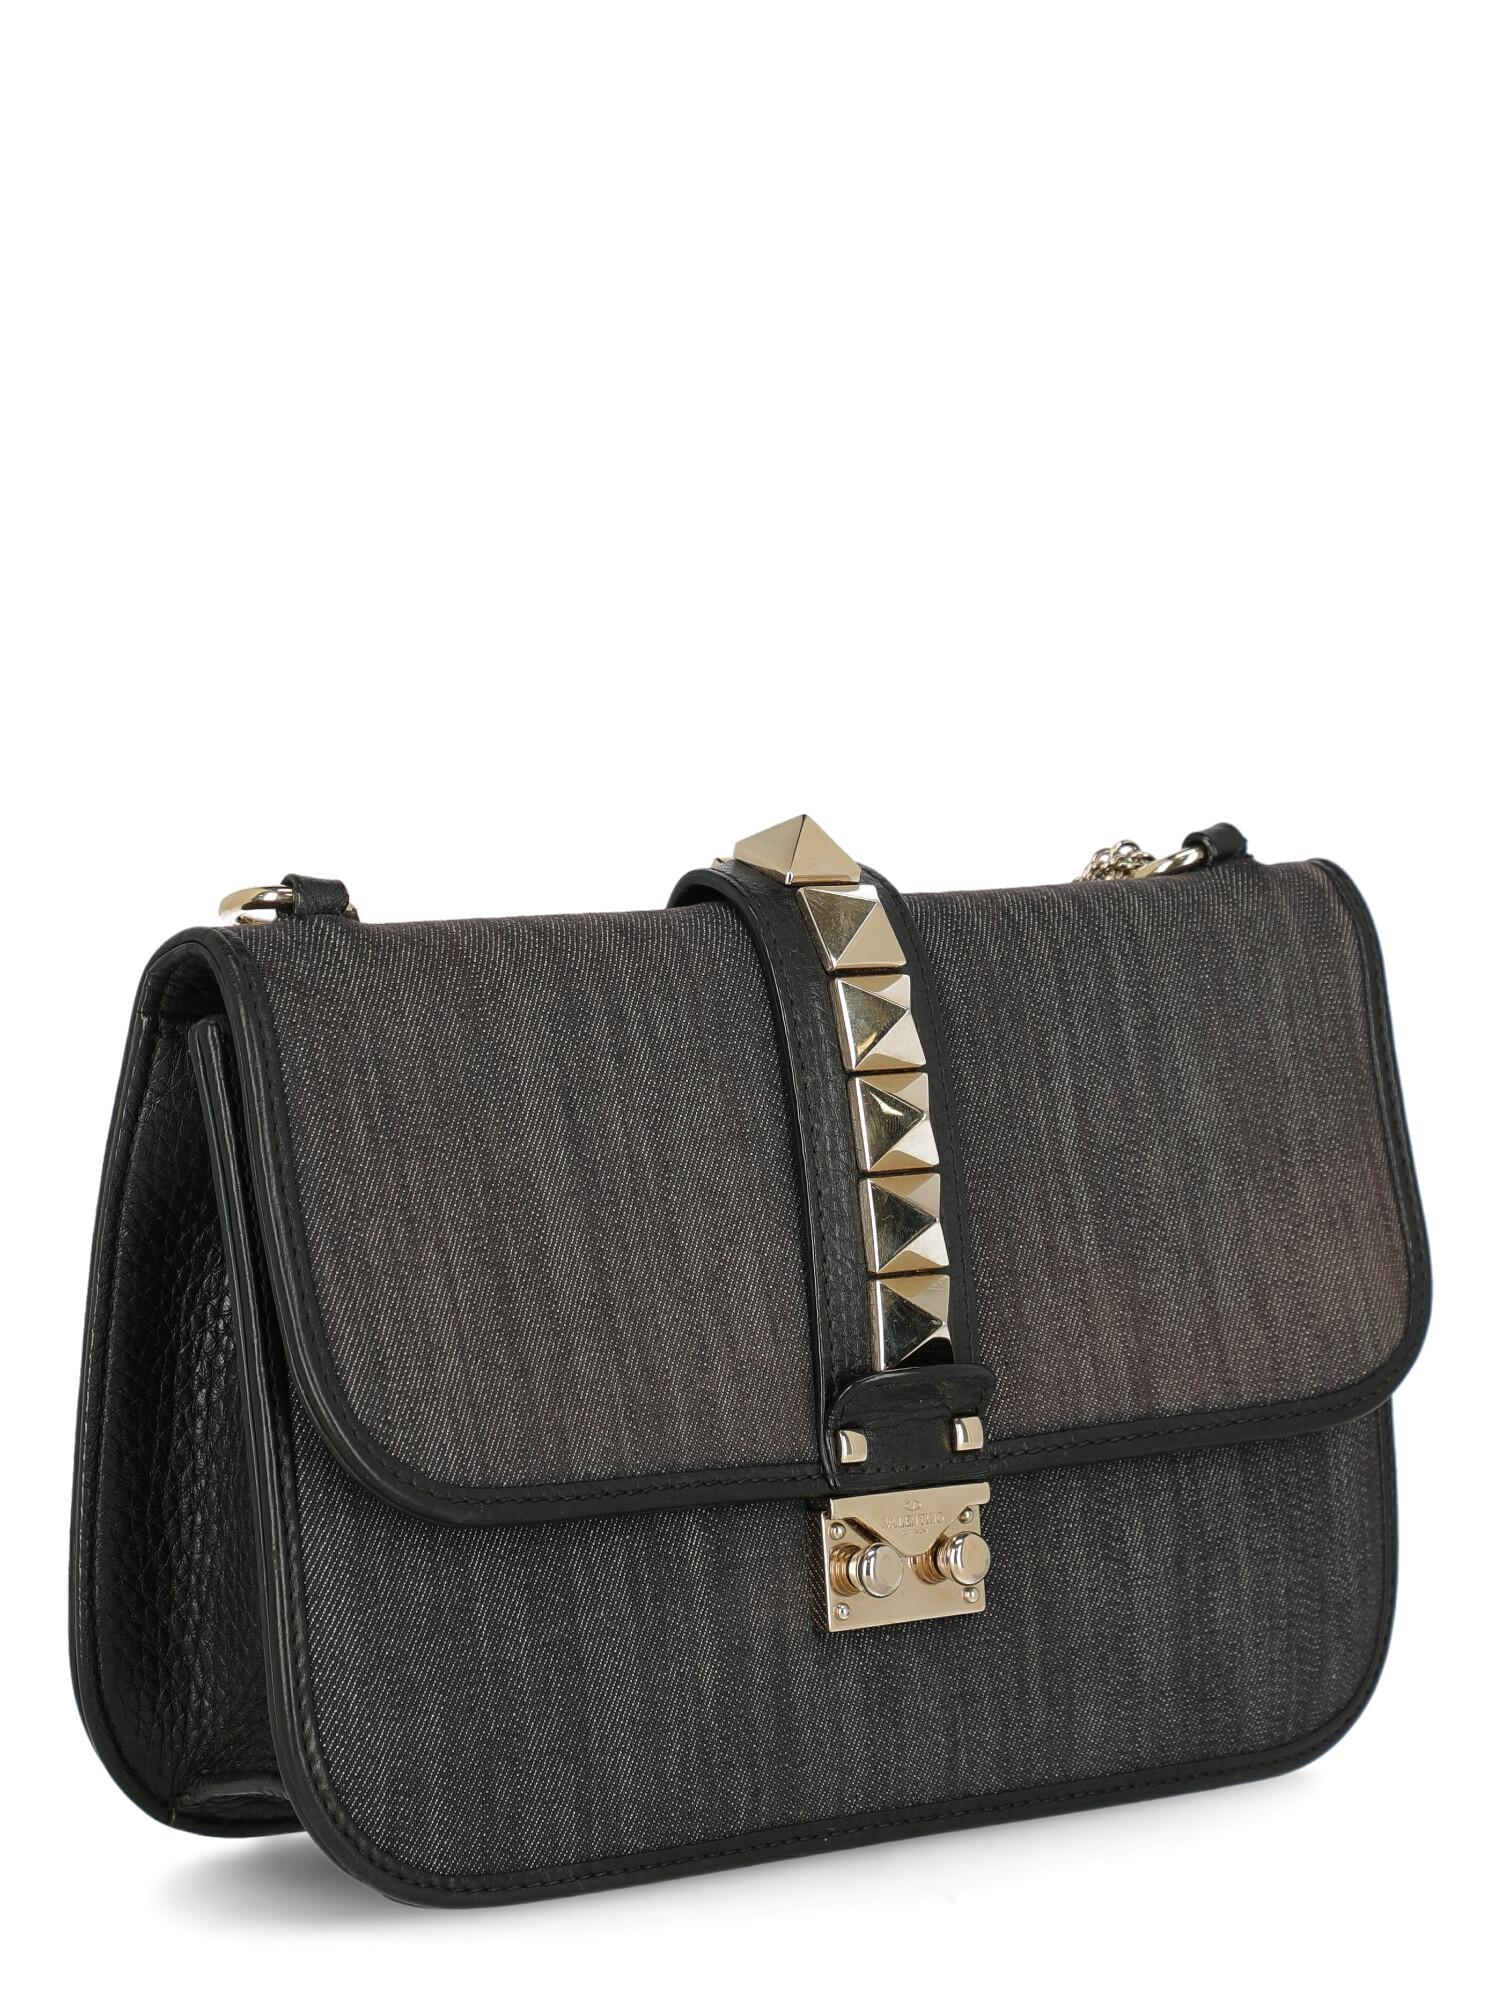 Valentino Woman Shoulder bag  Black Fabric In Good Condition For Sale In Milan, IT